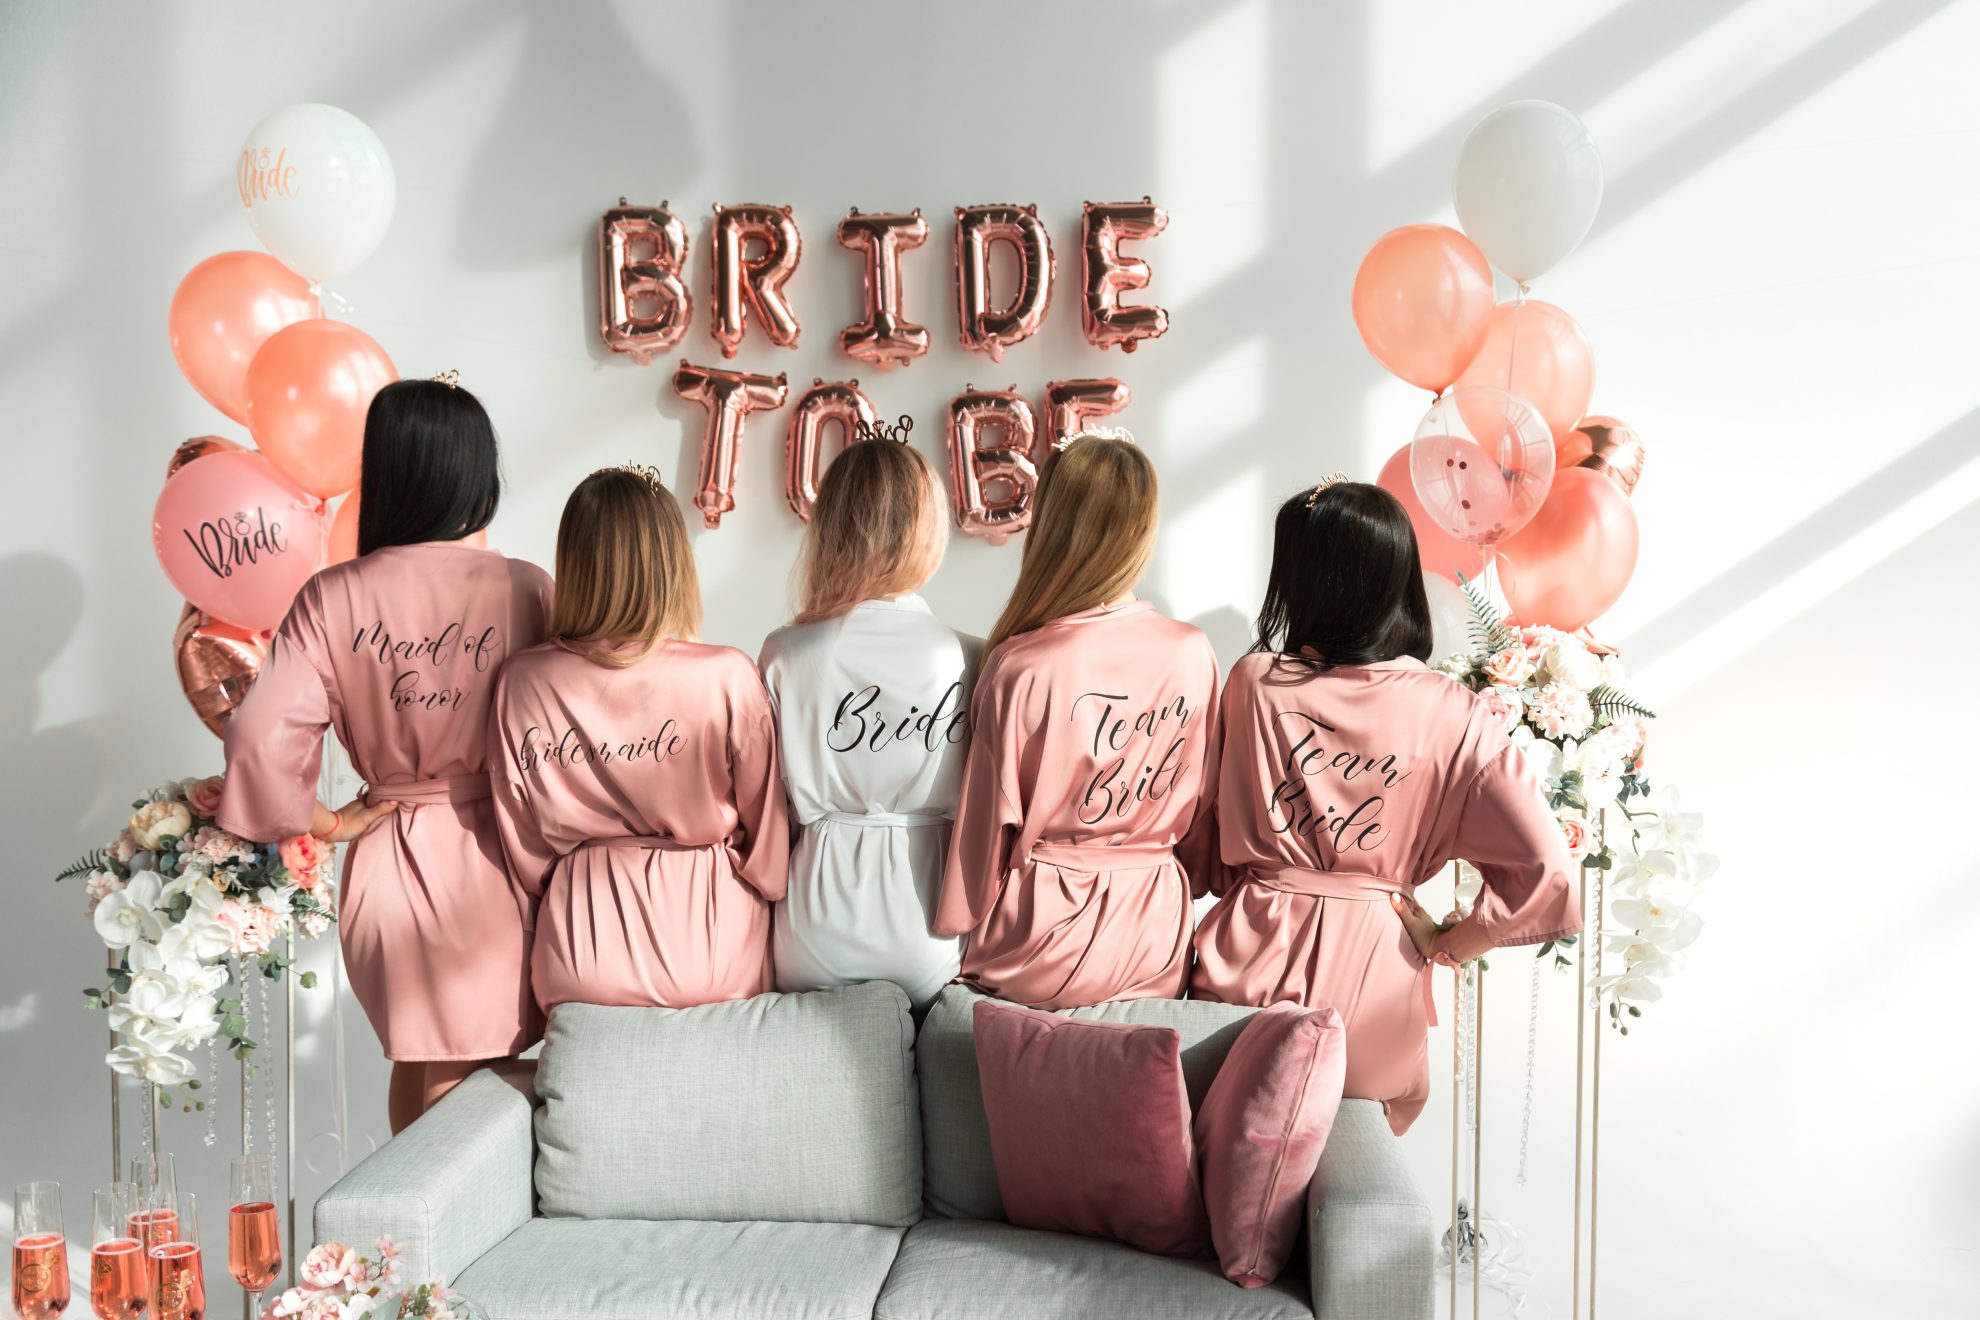 A bride stands in the middle of her 4 bridesmaids. All the ladies in the picture are facing away from the camera and the robes they are wearing either states 'bride' 'Maid of Honour' 'Bridesmaid' or 'Bride Tribe.' Balloons can be been in the background which spell 'Bride to be'